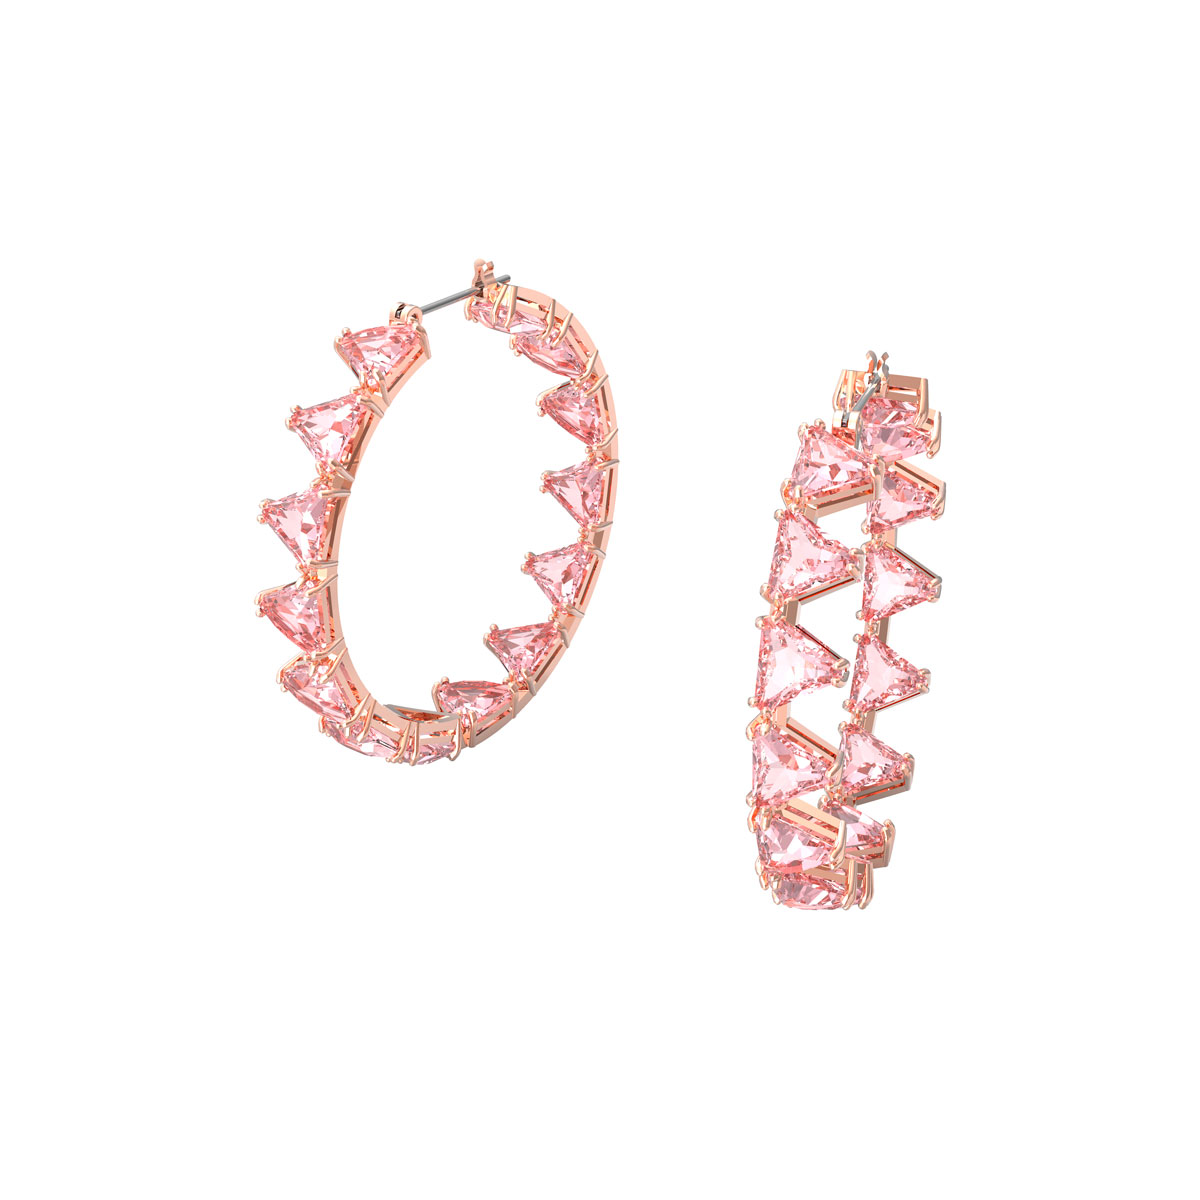 Swarovski Millenia Hoop Earrings, Triangle Cut Crystals, Pink, Rose Gold-tone Plated